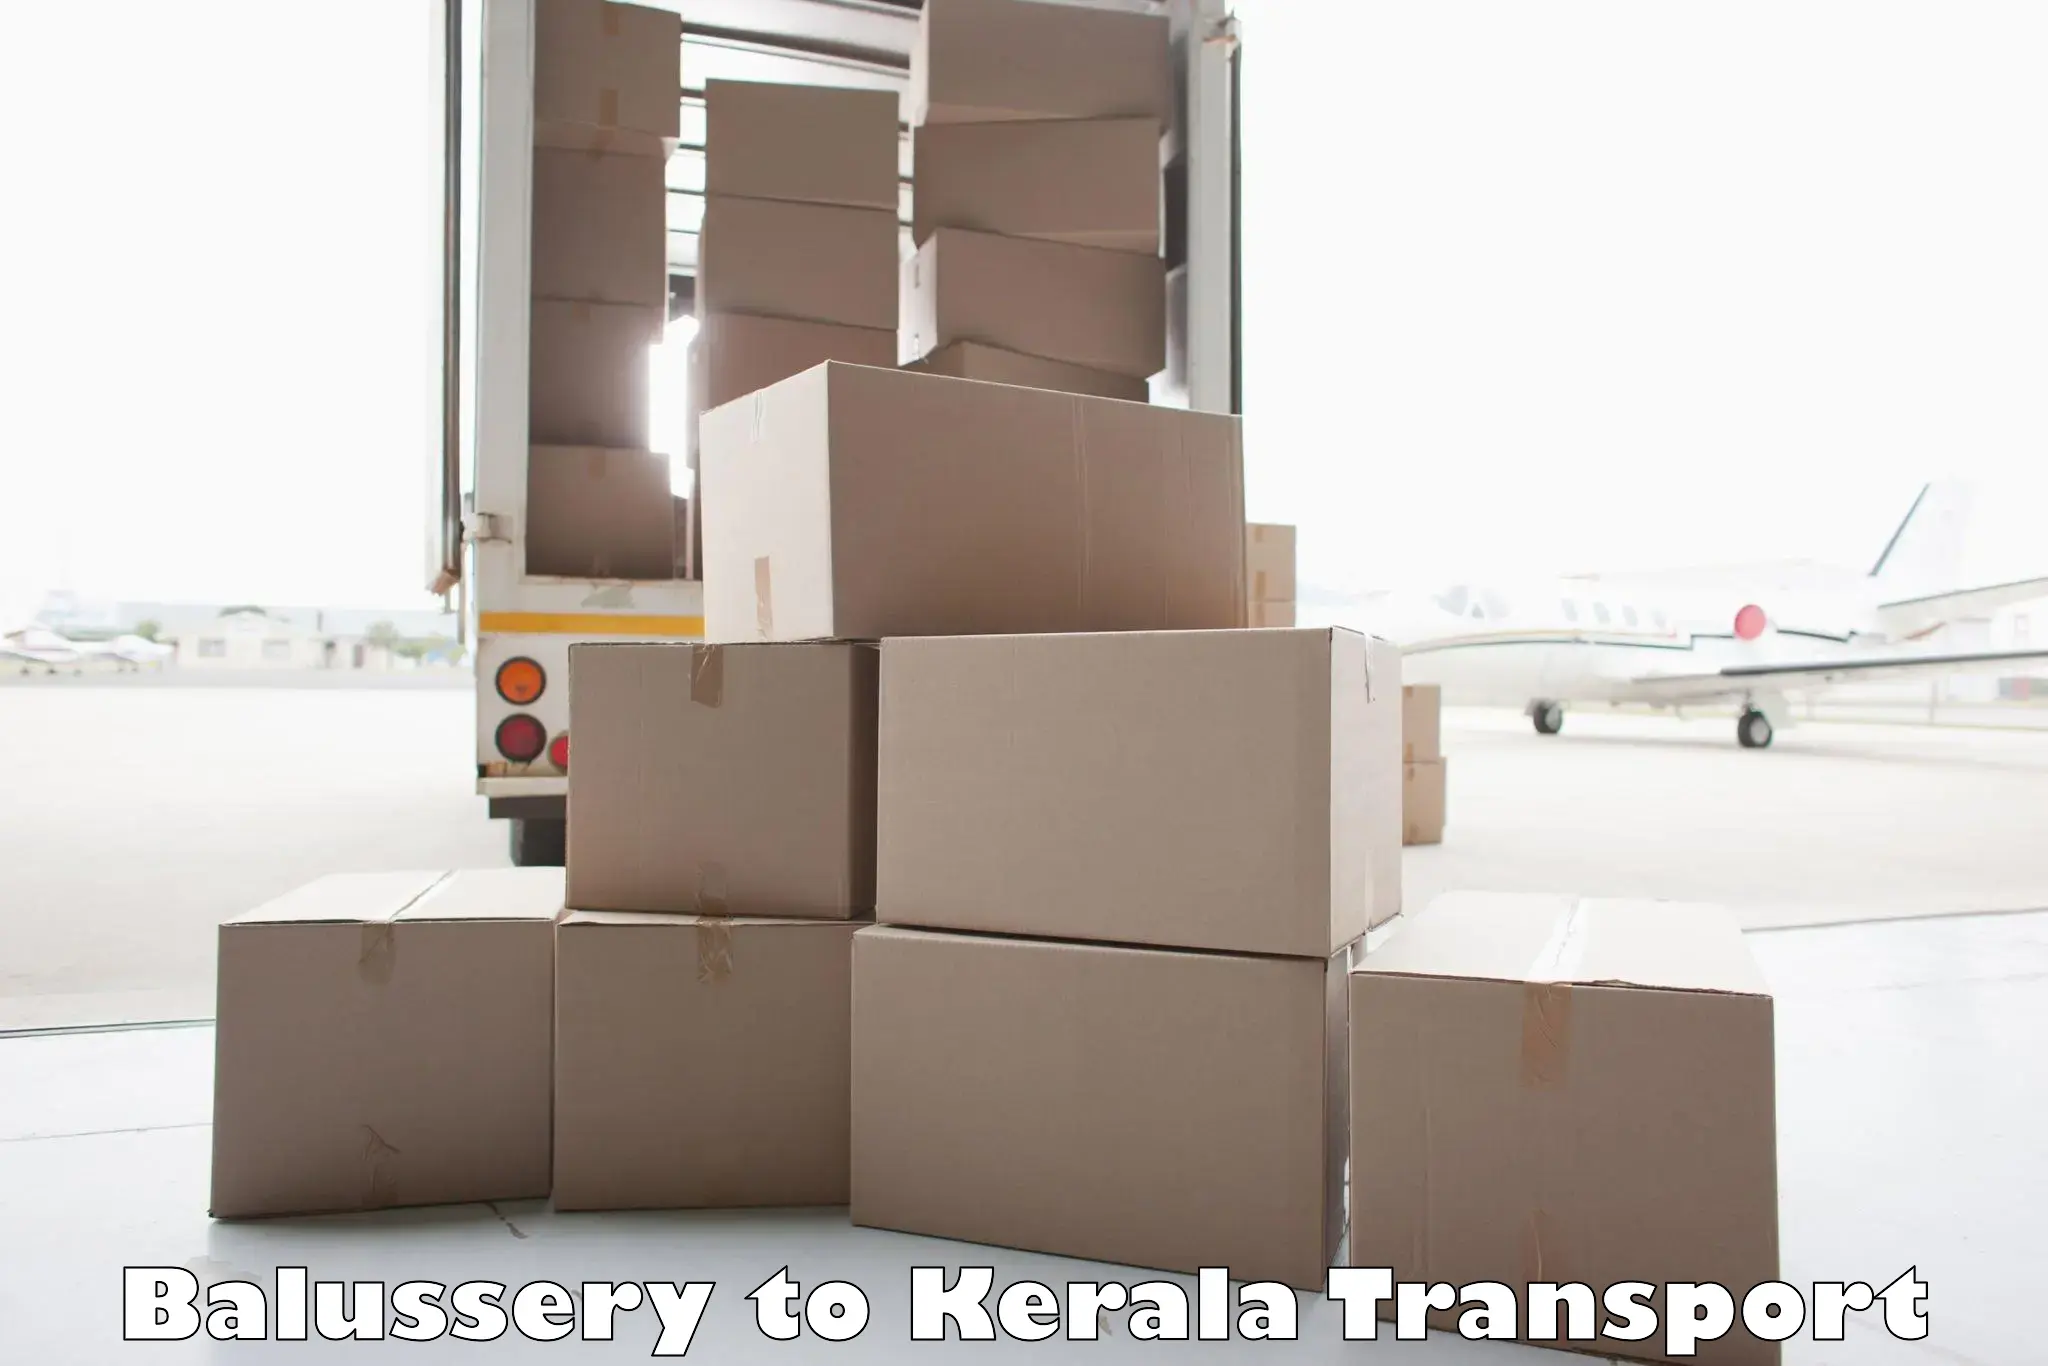 Transport services Balussery to Ernakulam